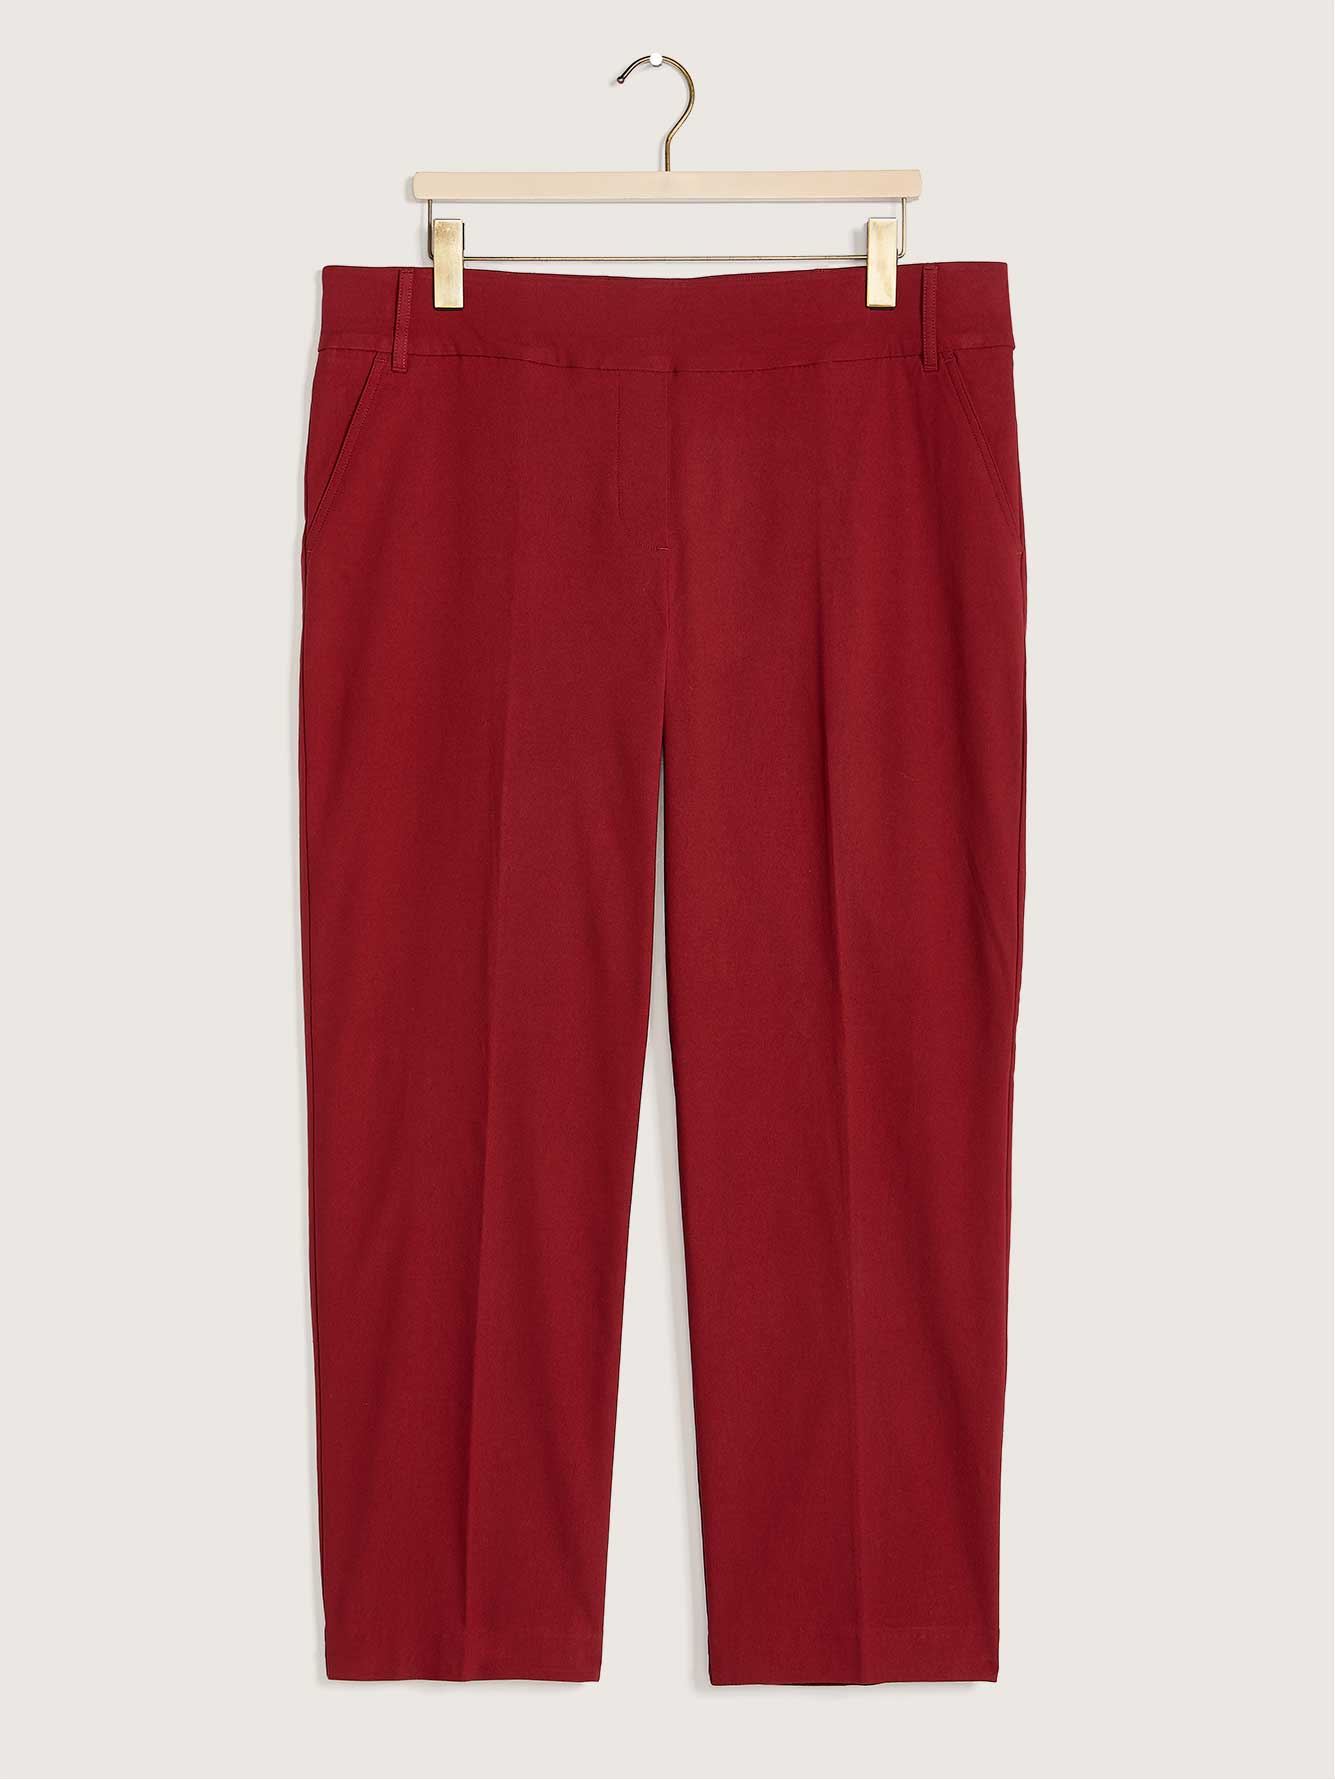 Petite, Savvy Straight-Leg Pant - In Every Story